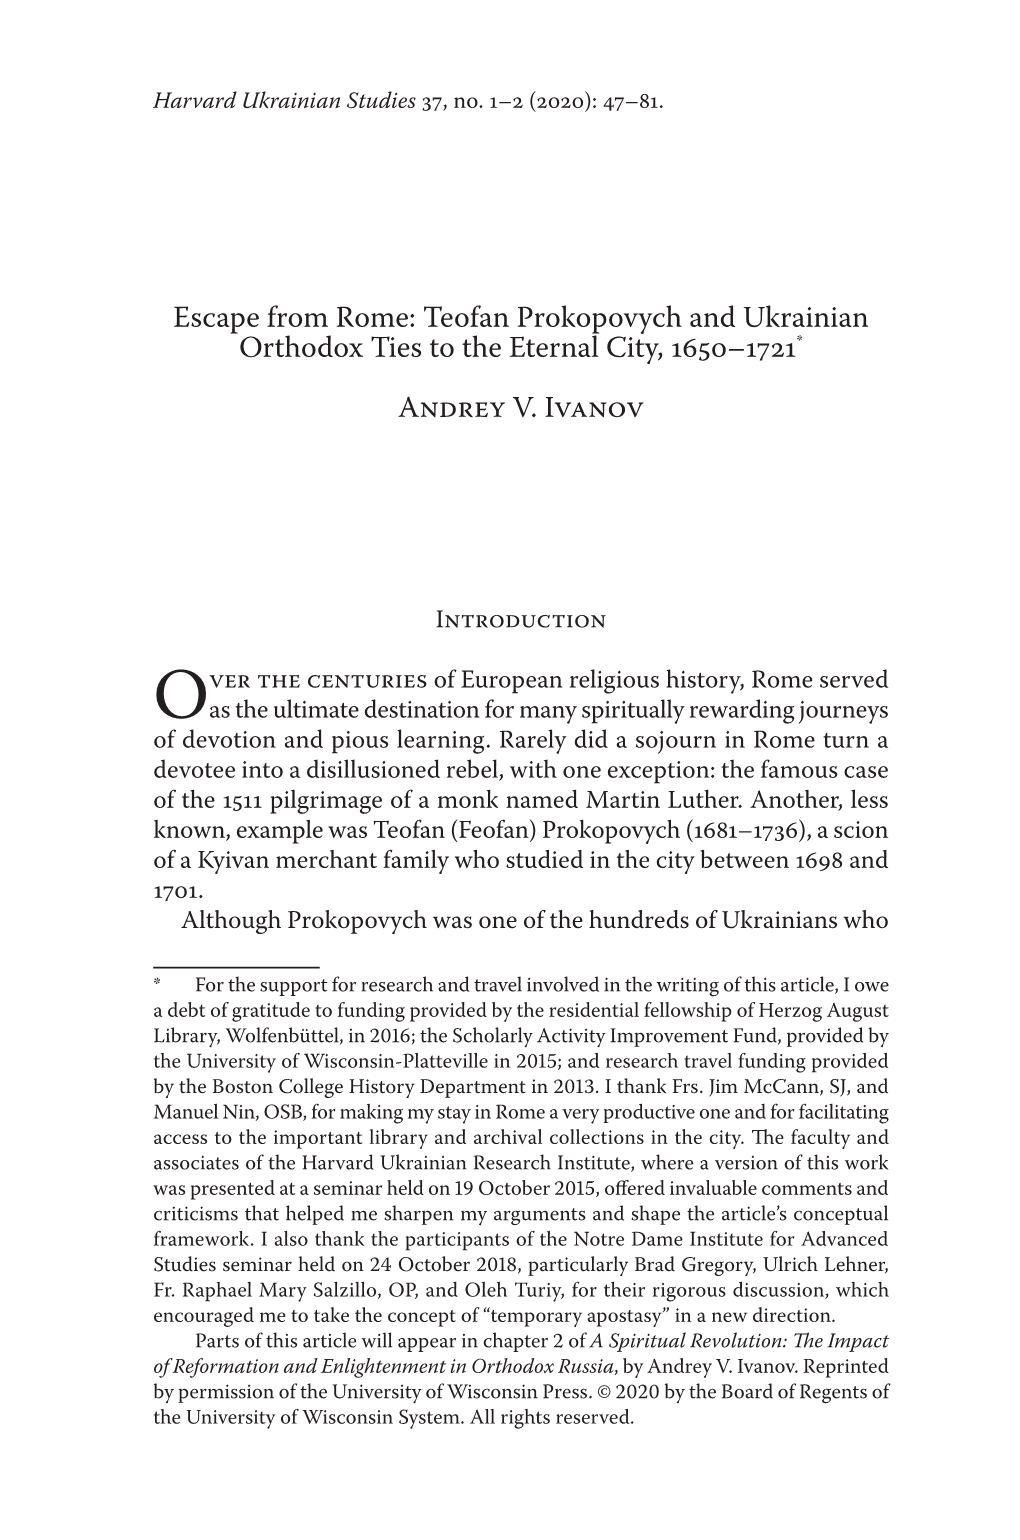 Escape from Rome: Teofan Prokopovych and Ukrainian Orthodox Ties to the Eternal City, 1650–1721* Andr Ey V